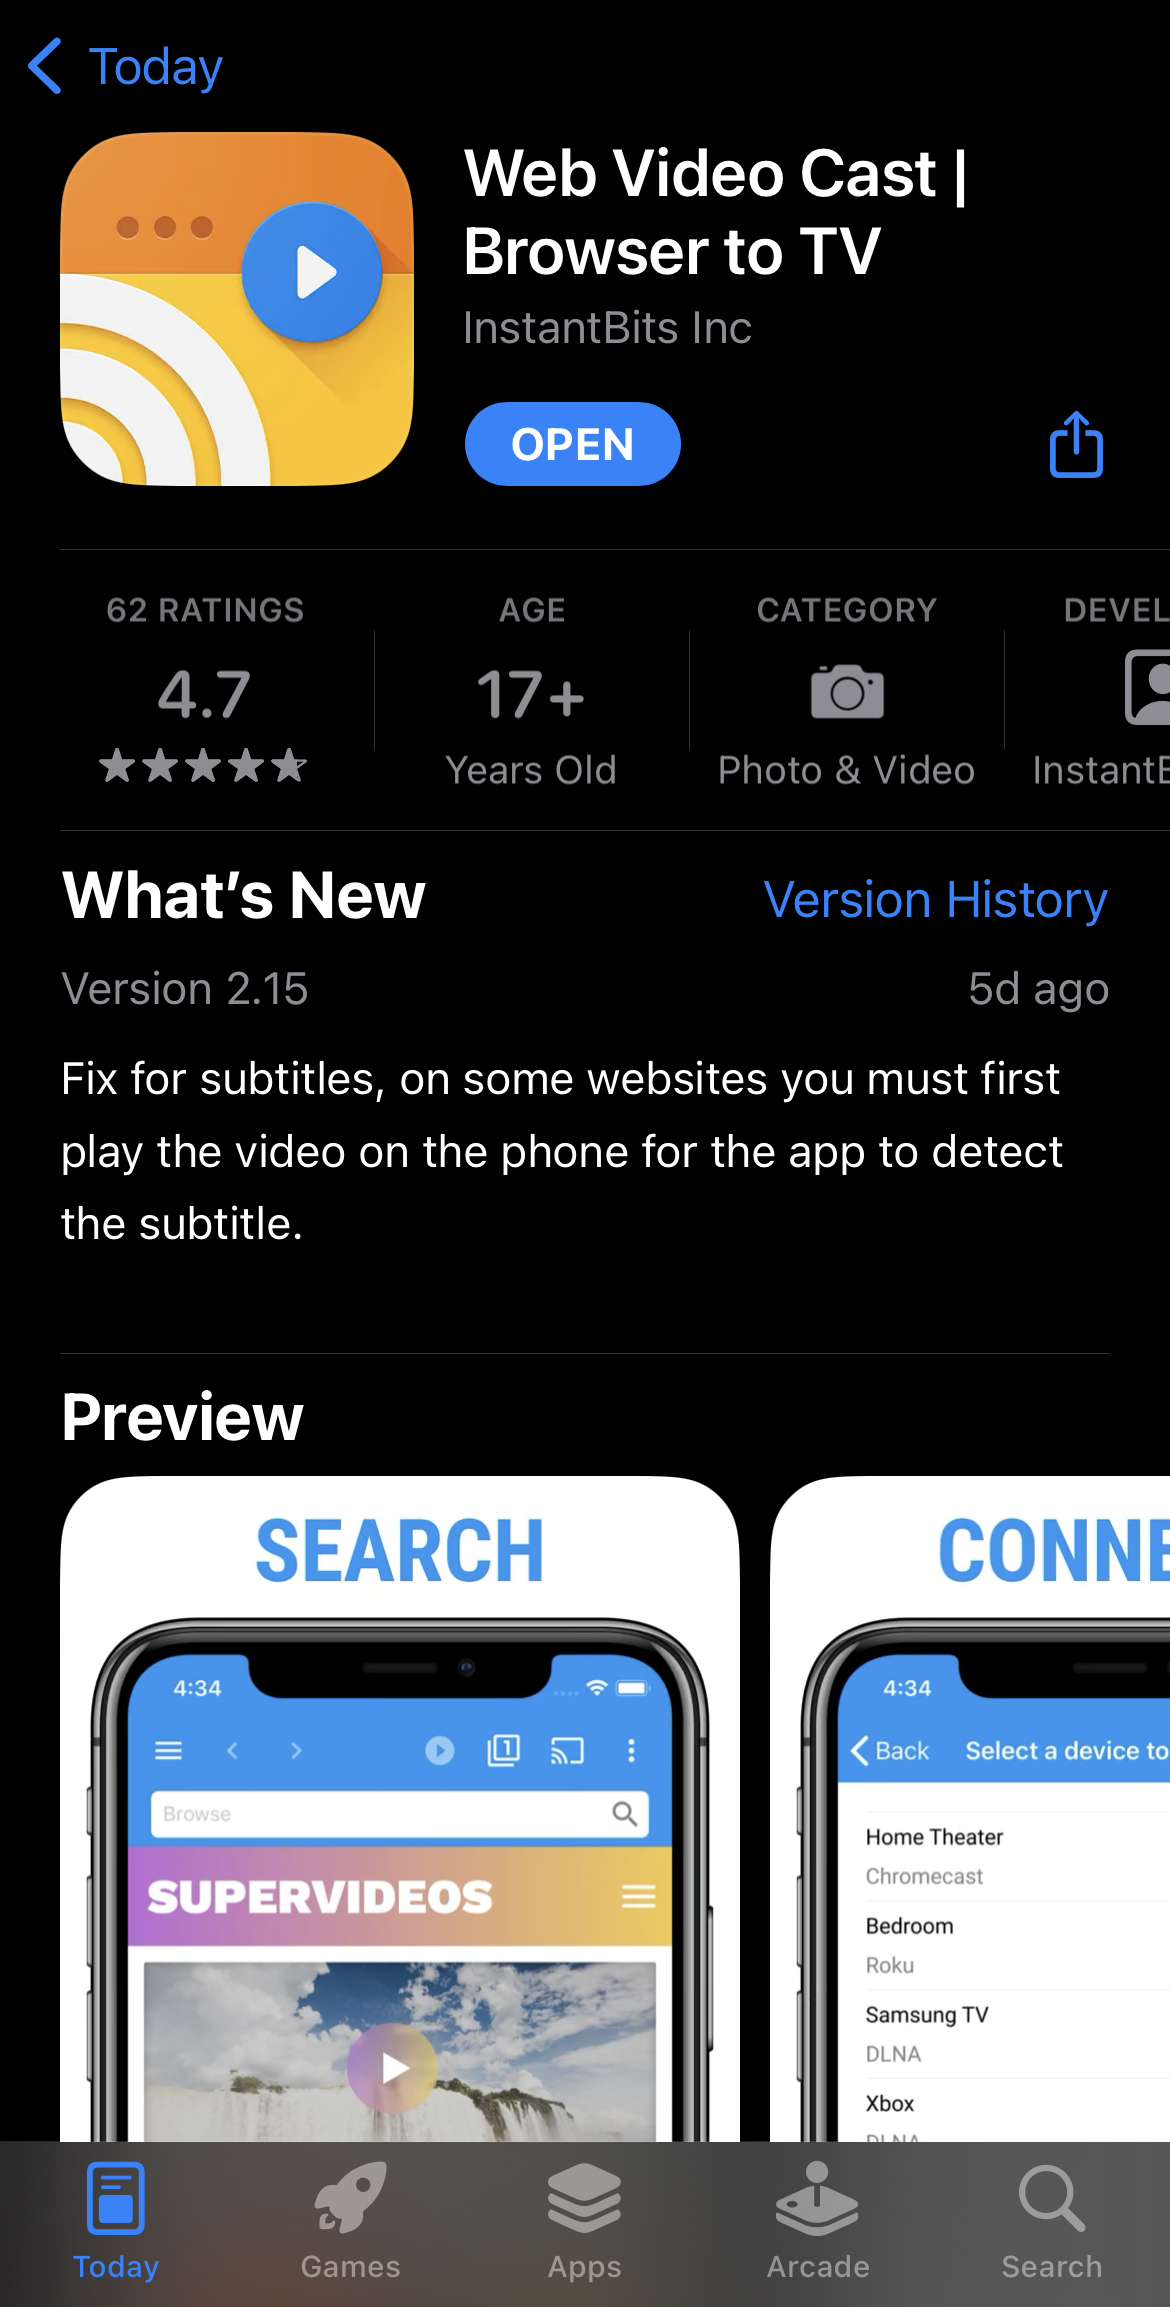 Web Video Cast on the App Store